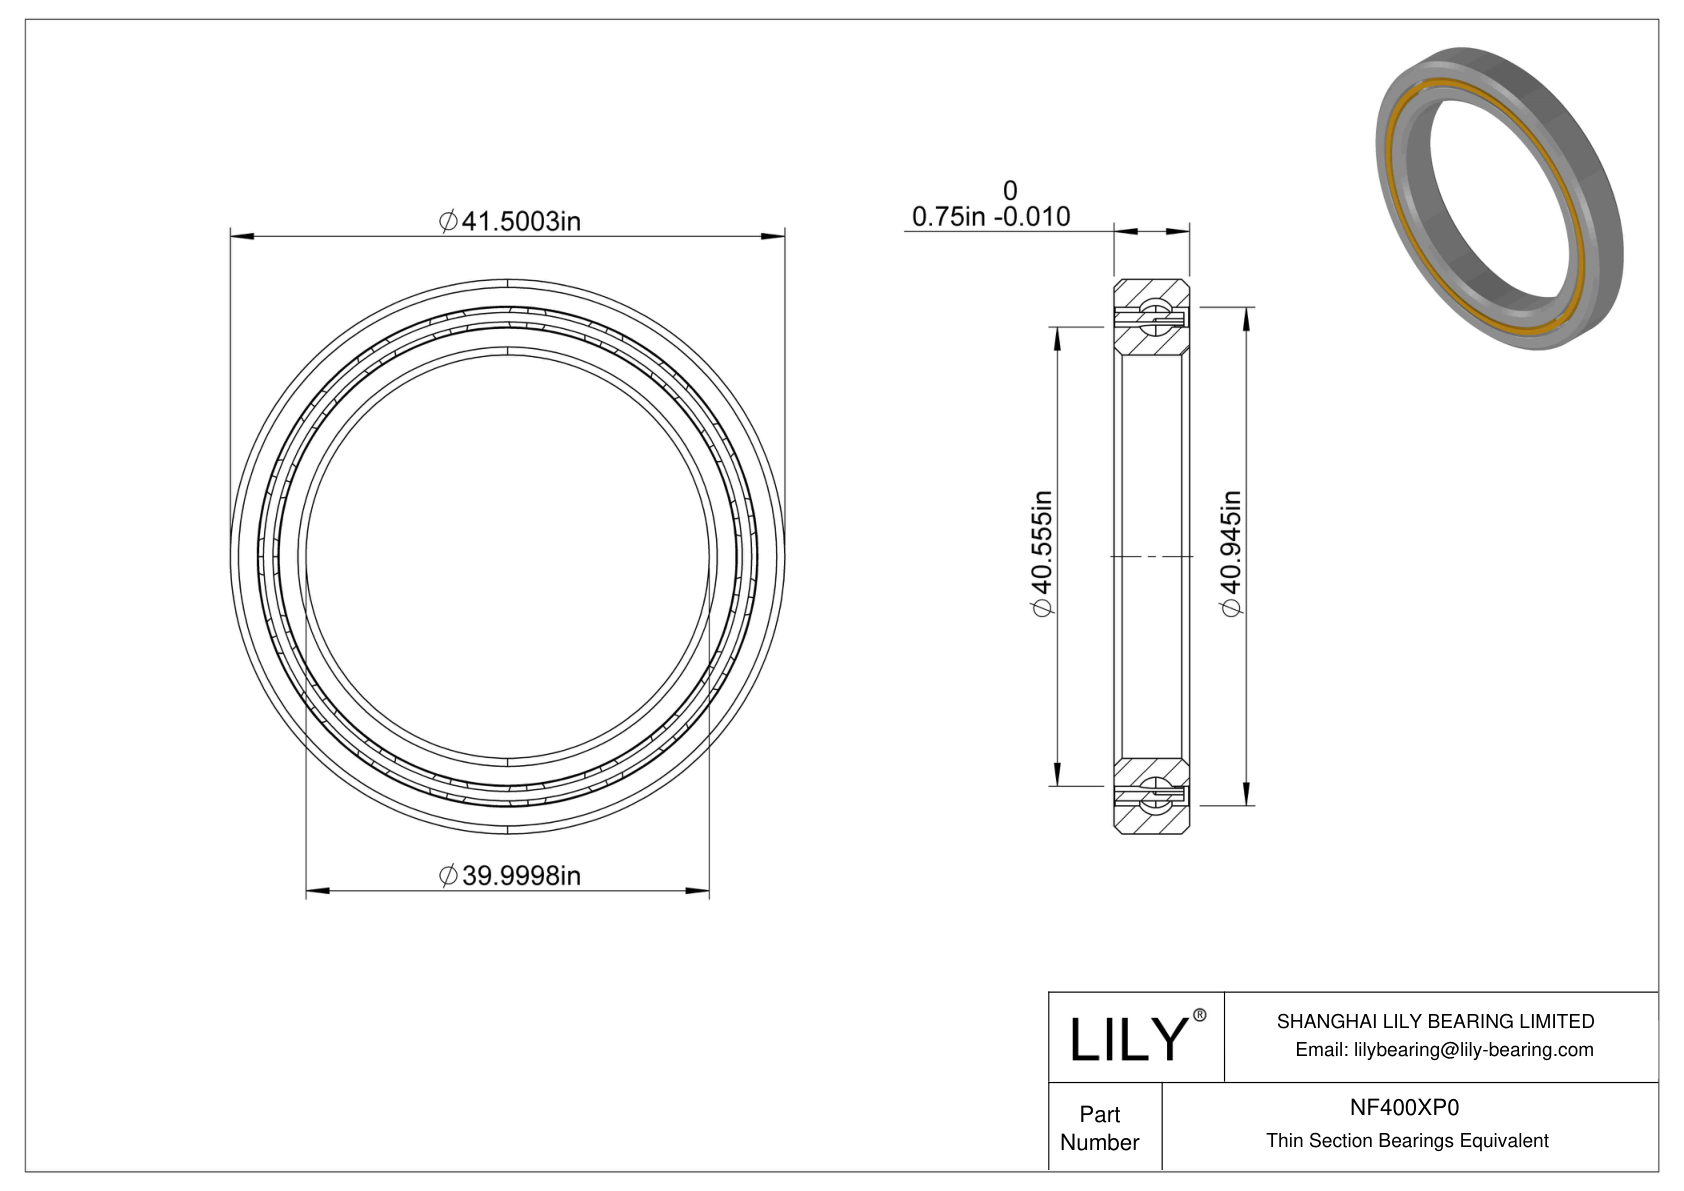 NF400XP0 Constant Section (CS) Bearings cad drawing